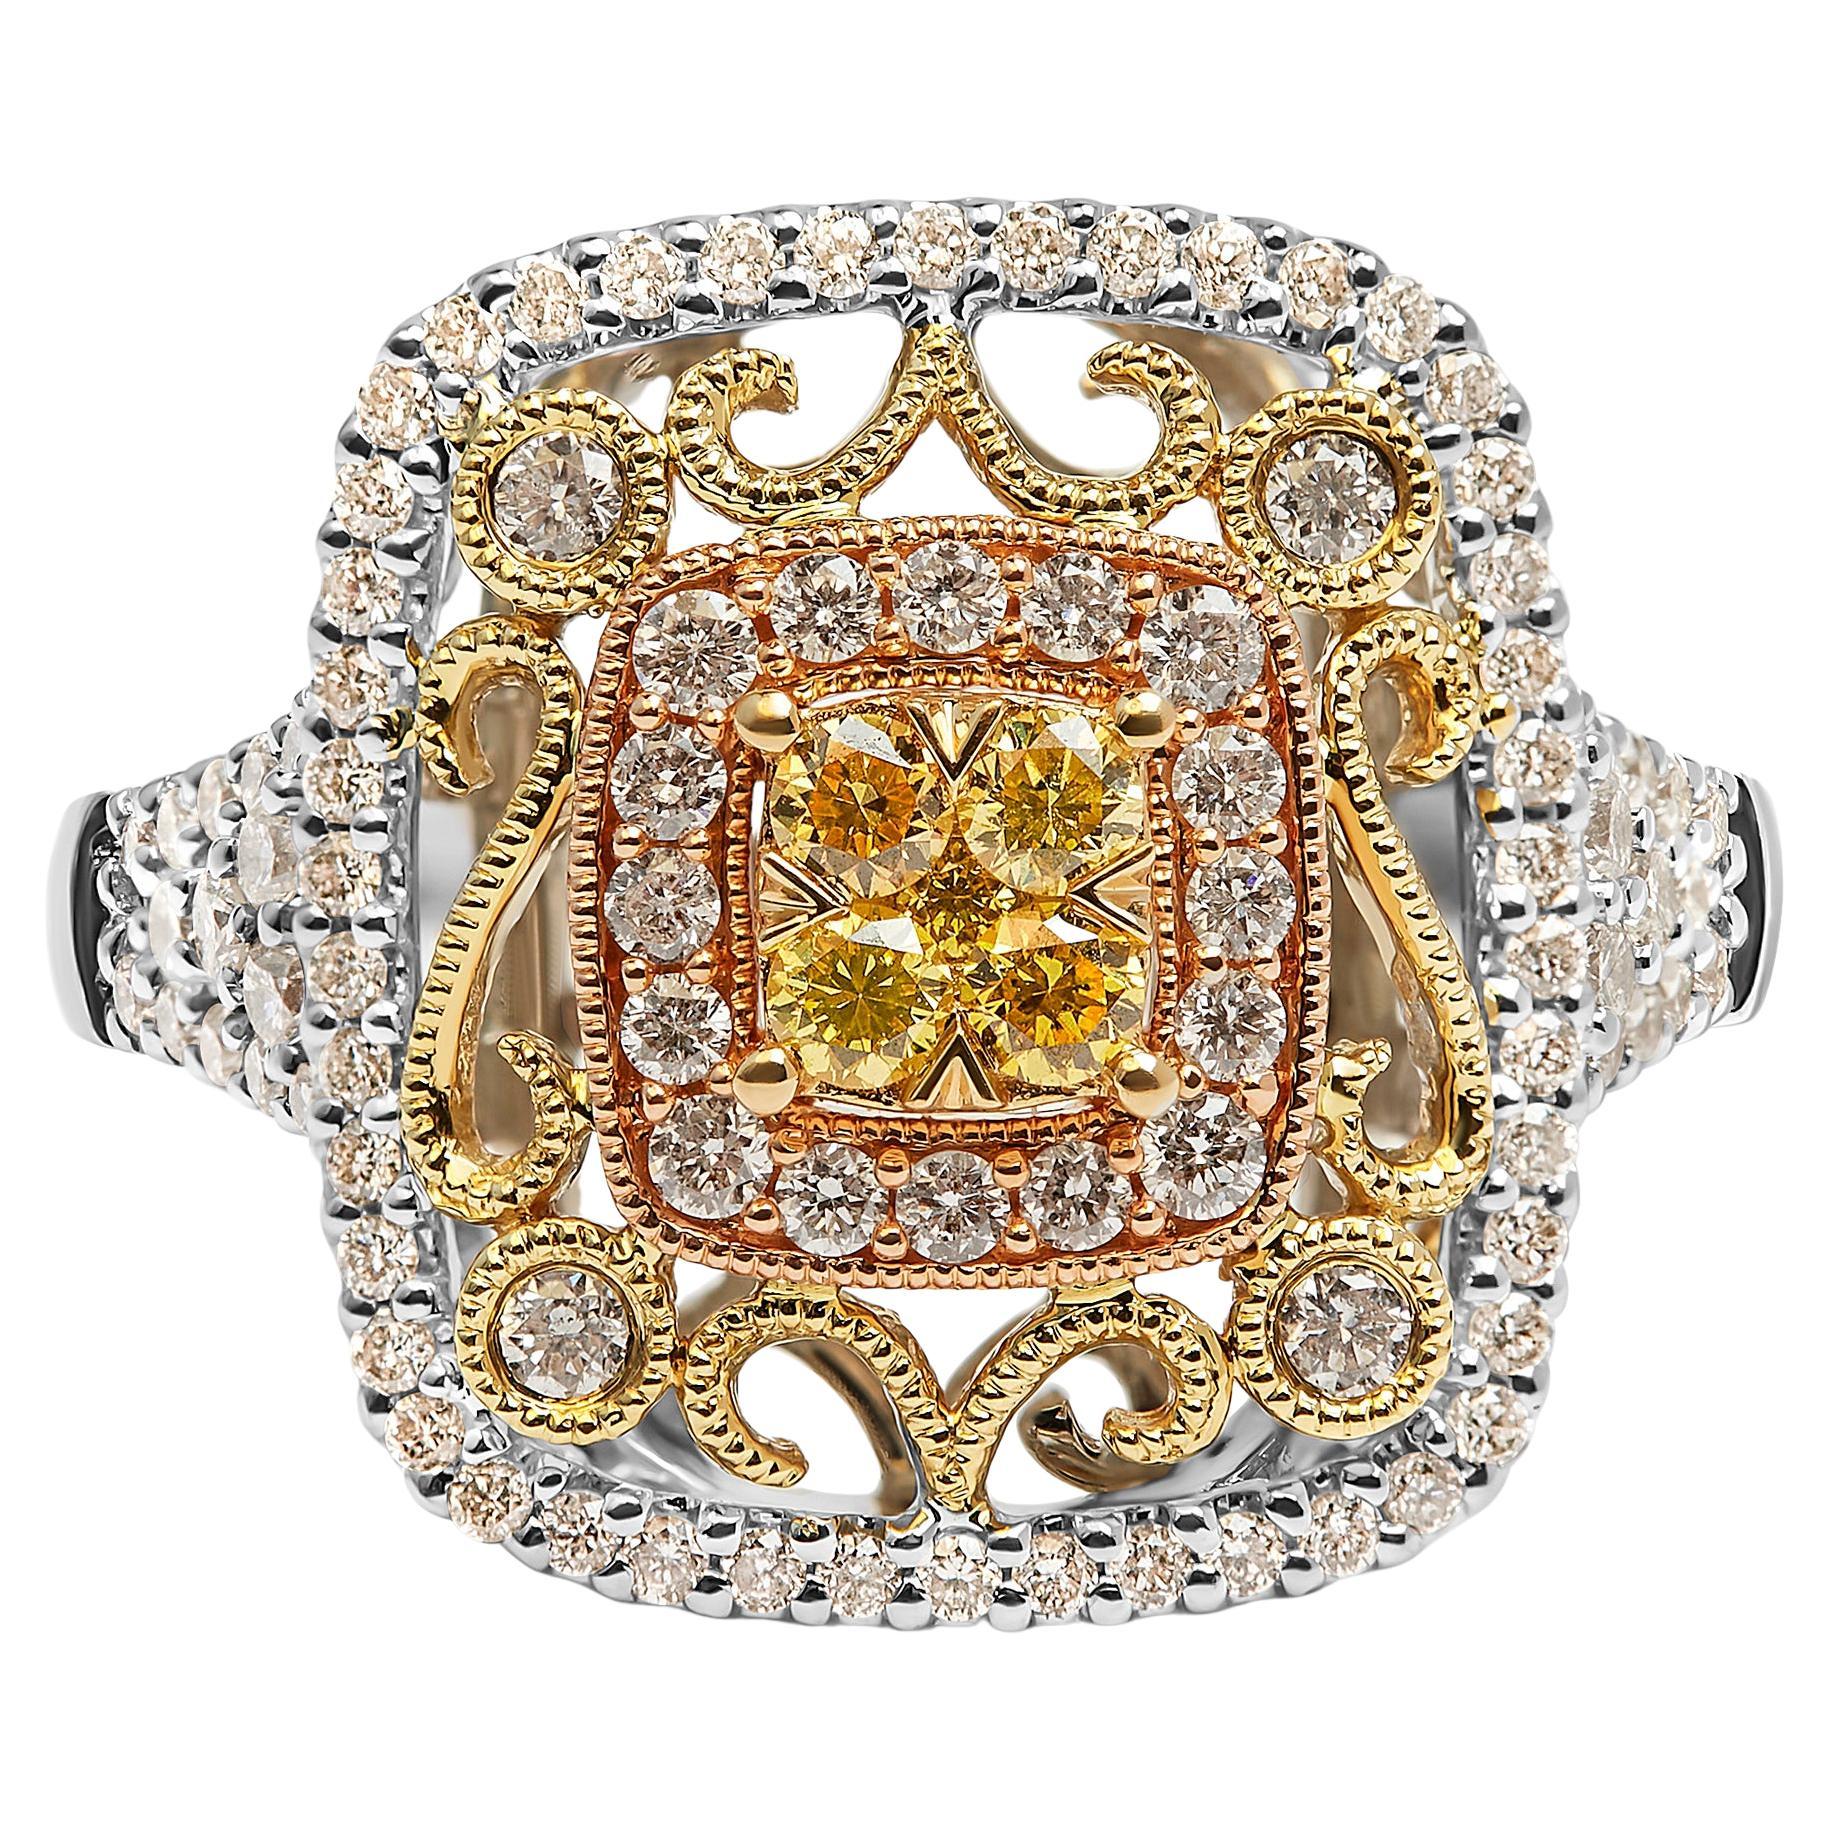 14K Tri-Toned Gold 1.0 Carat Diamond Halo and Milgrain Cocktail Cluster Ring